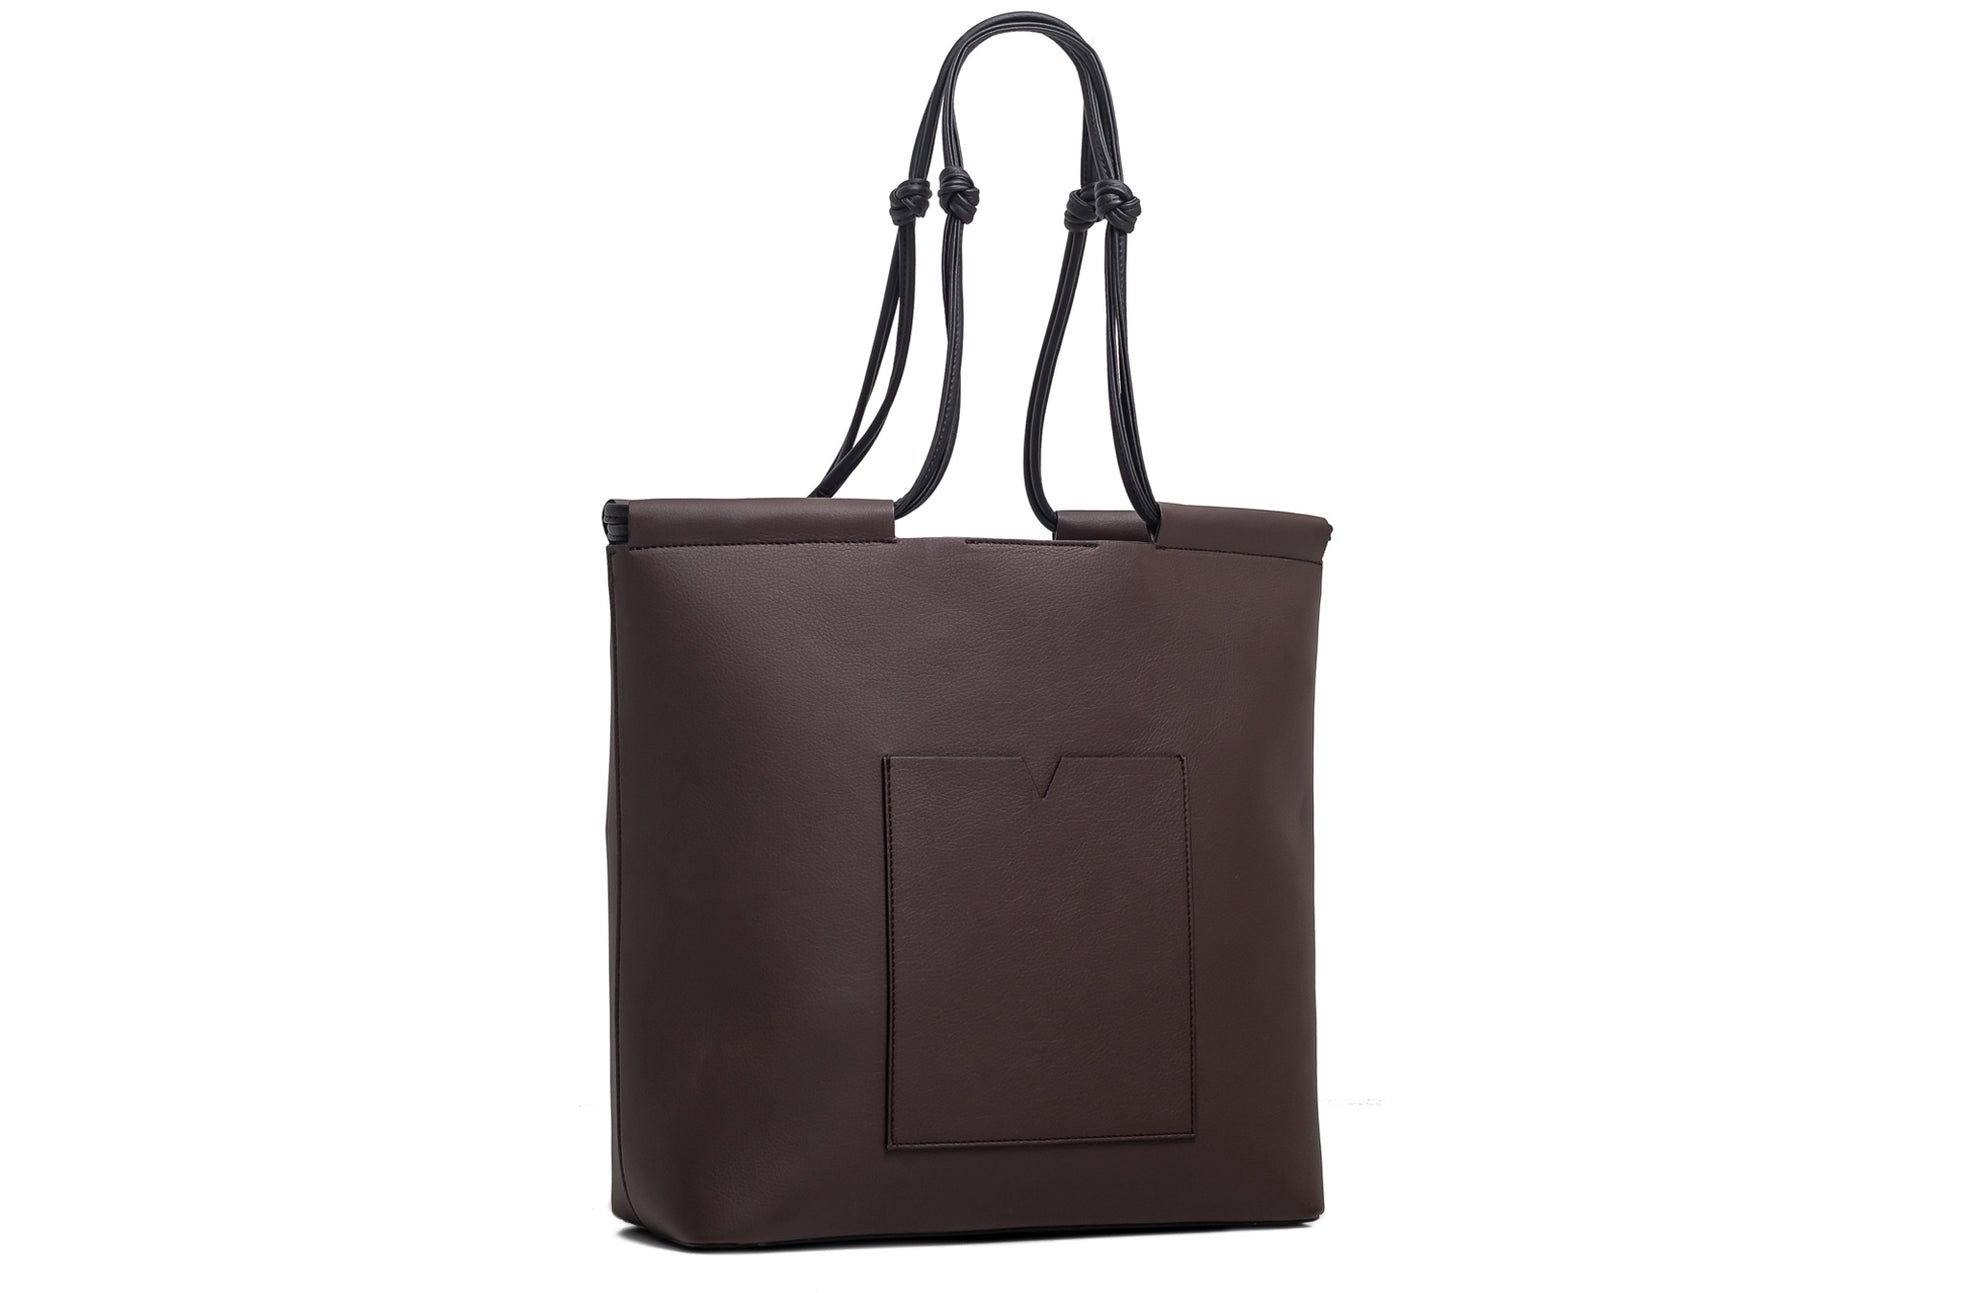 The Market Tote in Technik in Taupe and Black image 4